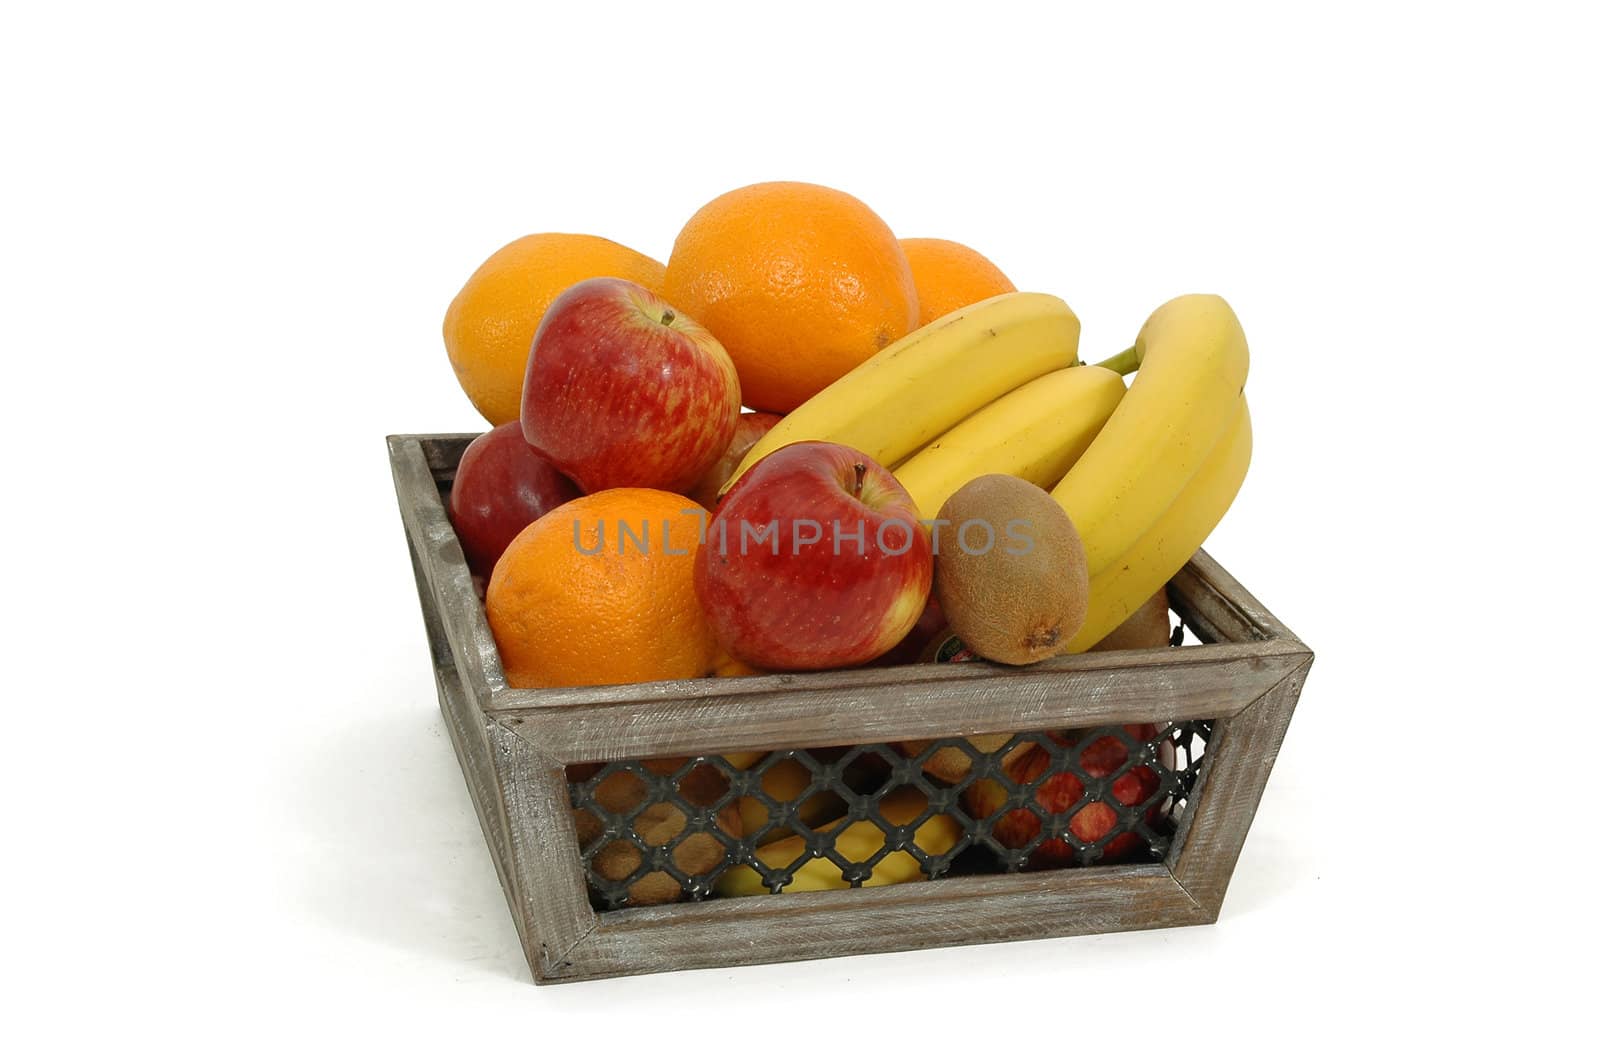 Fruit basket on a white background. The basket is made out of wood.